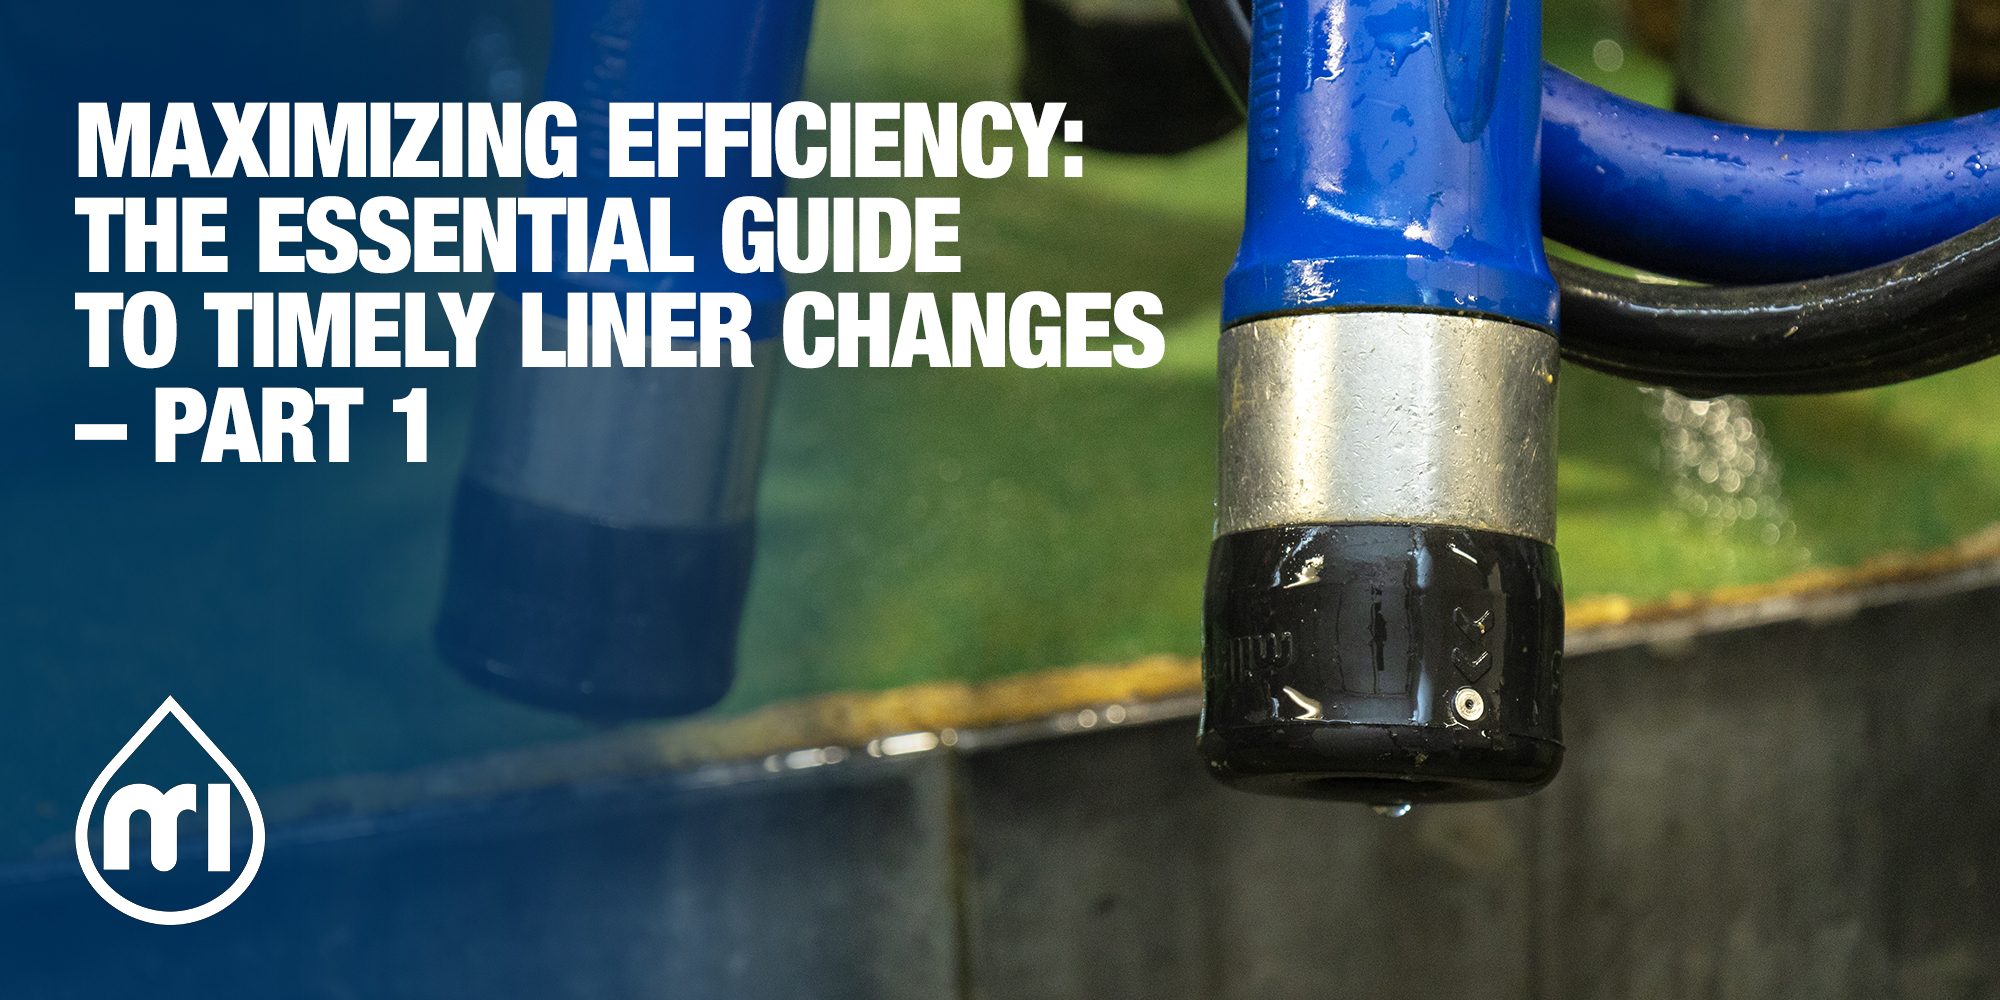 Maximizing efficiency: the essential guide to timely liner changes – Part 1 